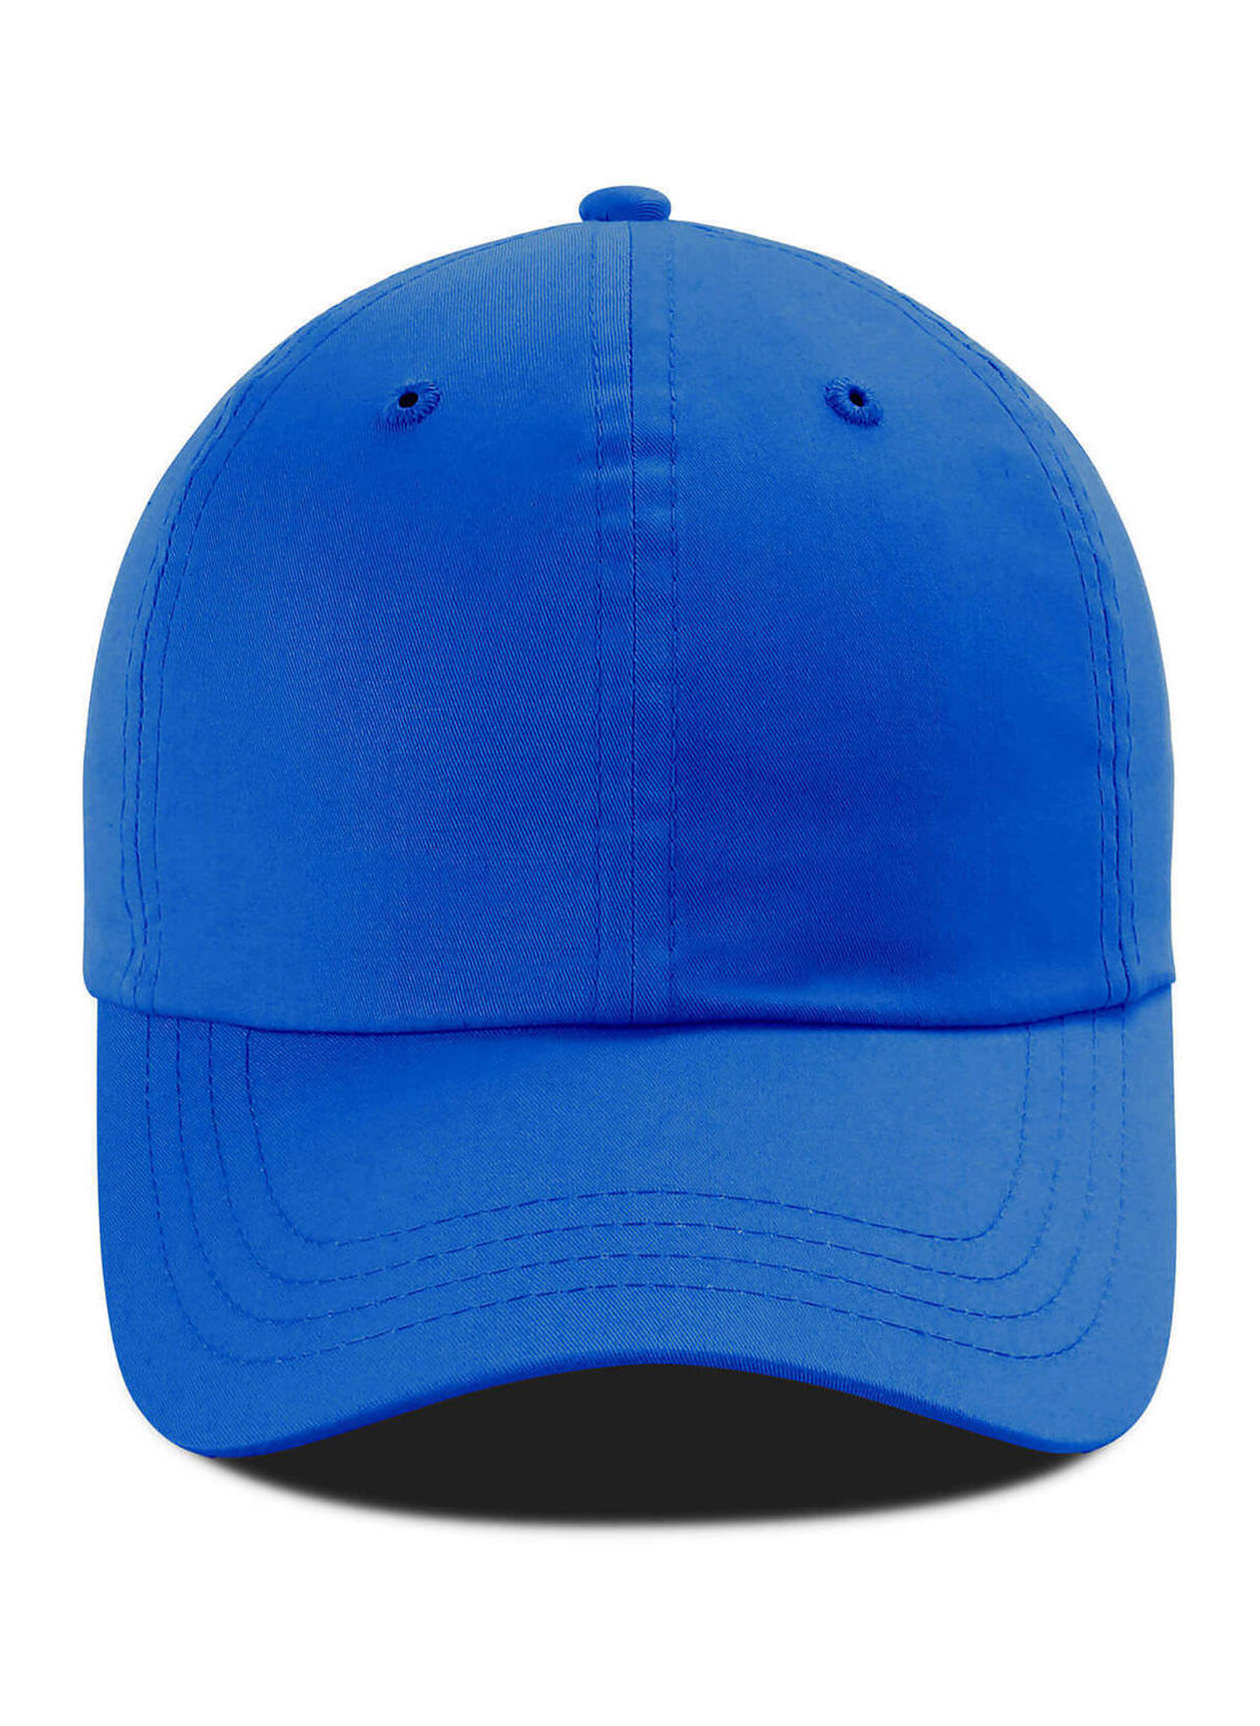 Imperial Royal The Zero Lightweight Cotton Hat